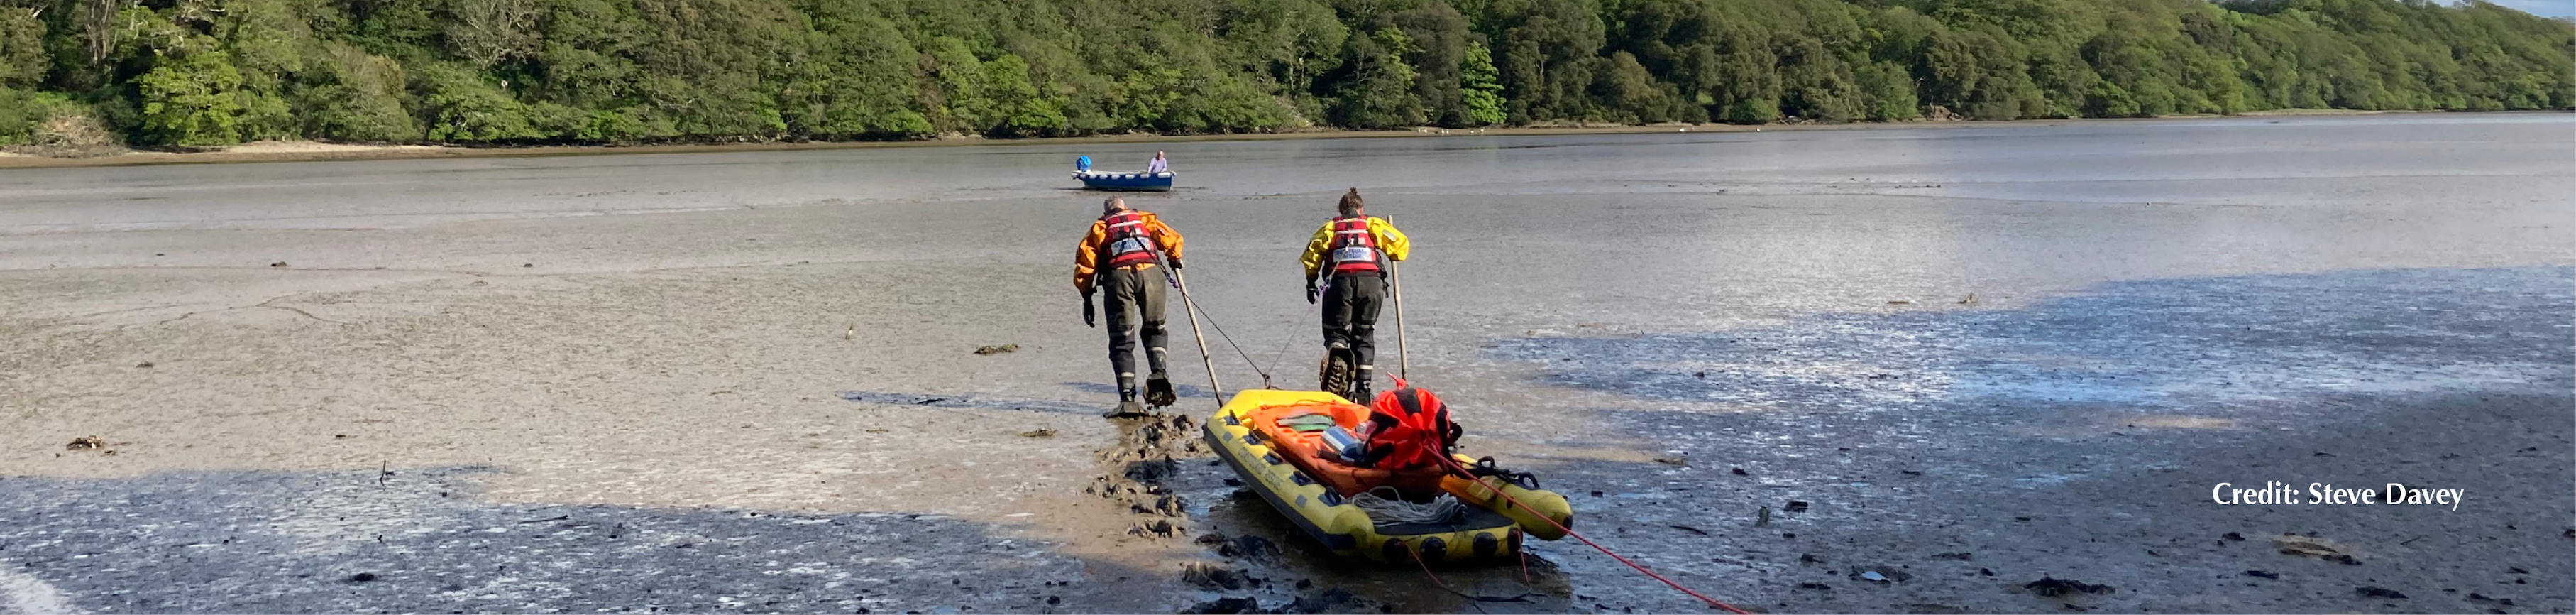 Two coastguard rescue officers on a mud rescue